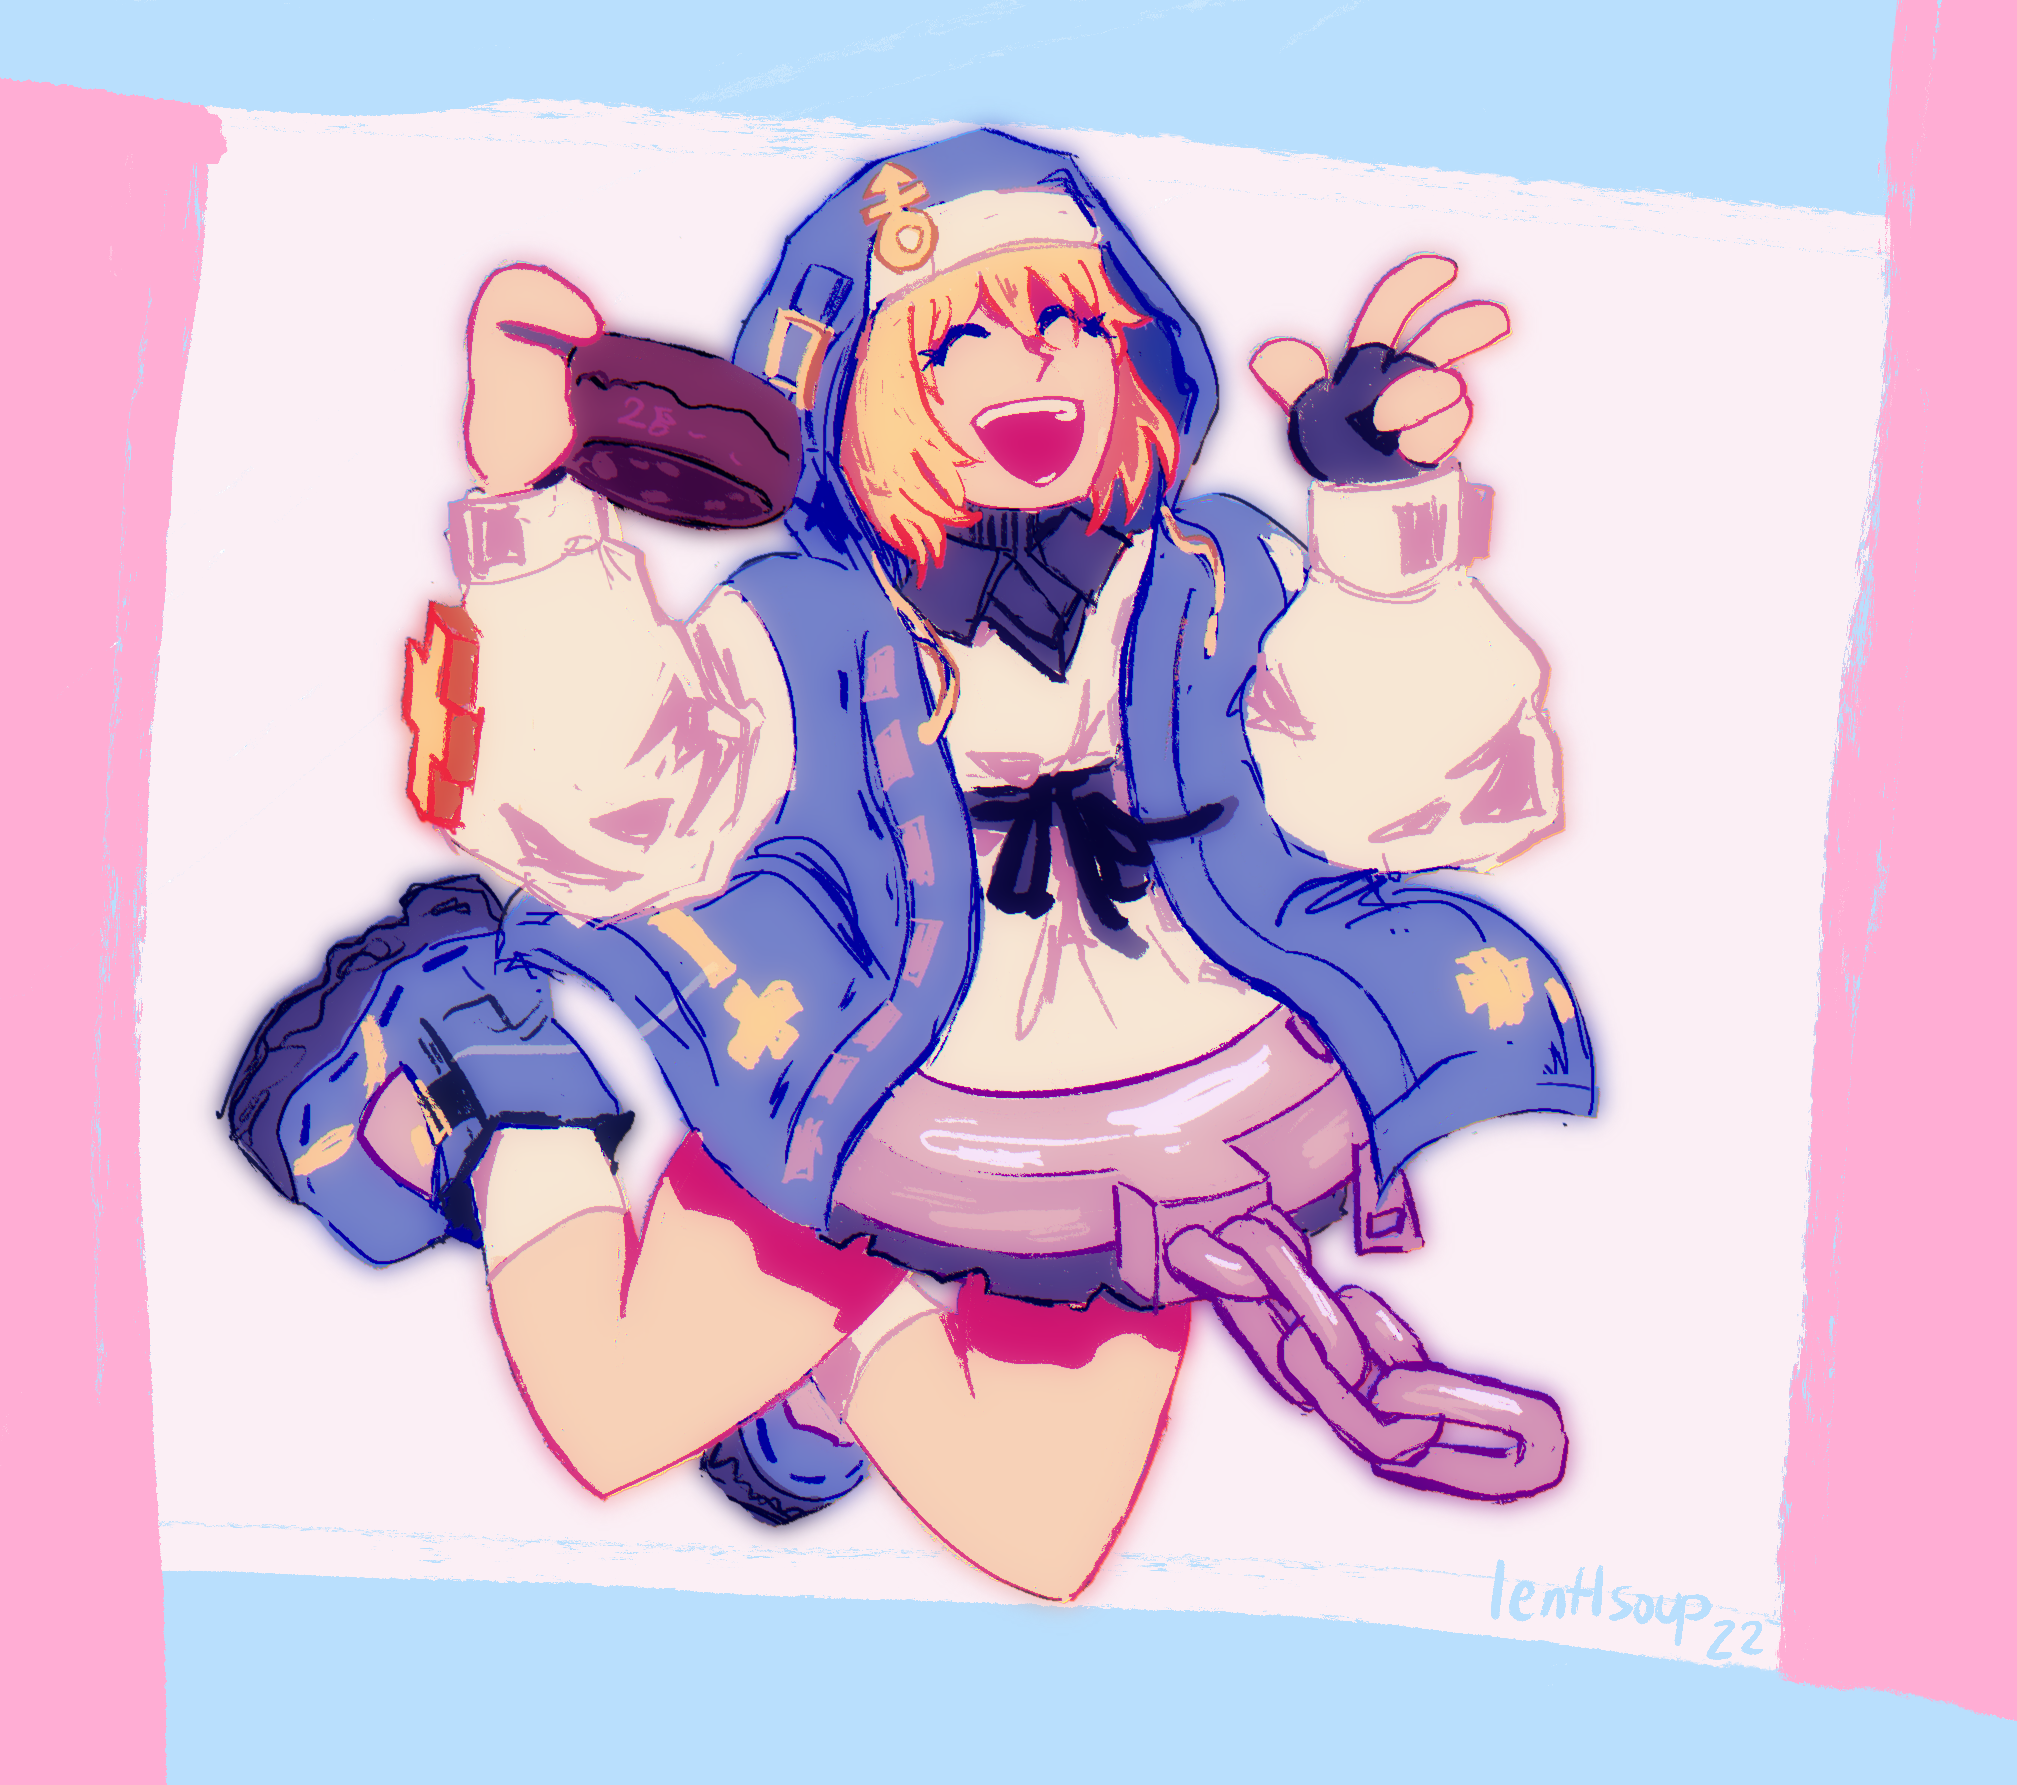 Digital drawing of Bridget from Guilty Gear in her Strive design. She is jumping in the air with her legs kicked back and a joyful expression on her face. She holds her yo-yo in one hand and is doing a peace sign with the other. She is against a simple white background with pink and blue borders, altogether making the colours of the trans flag.